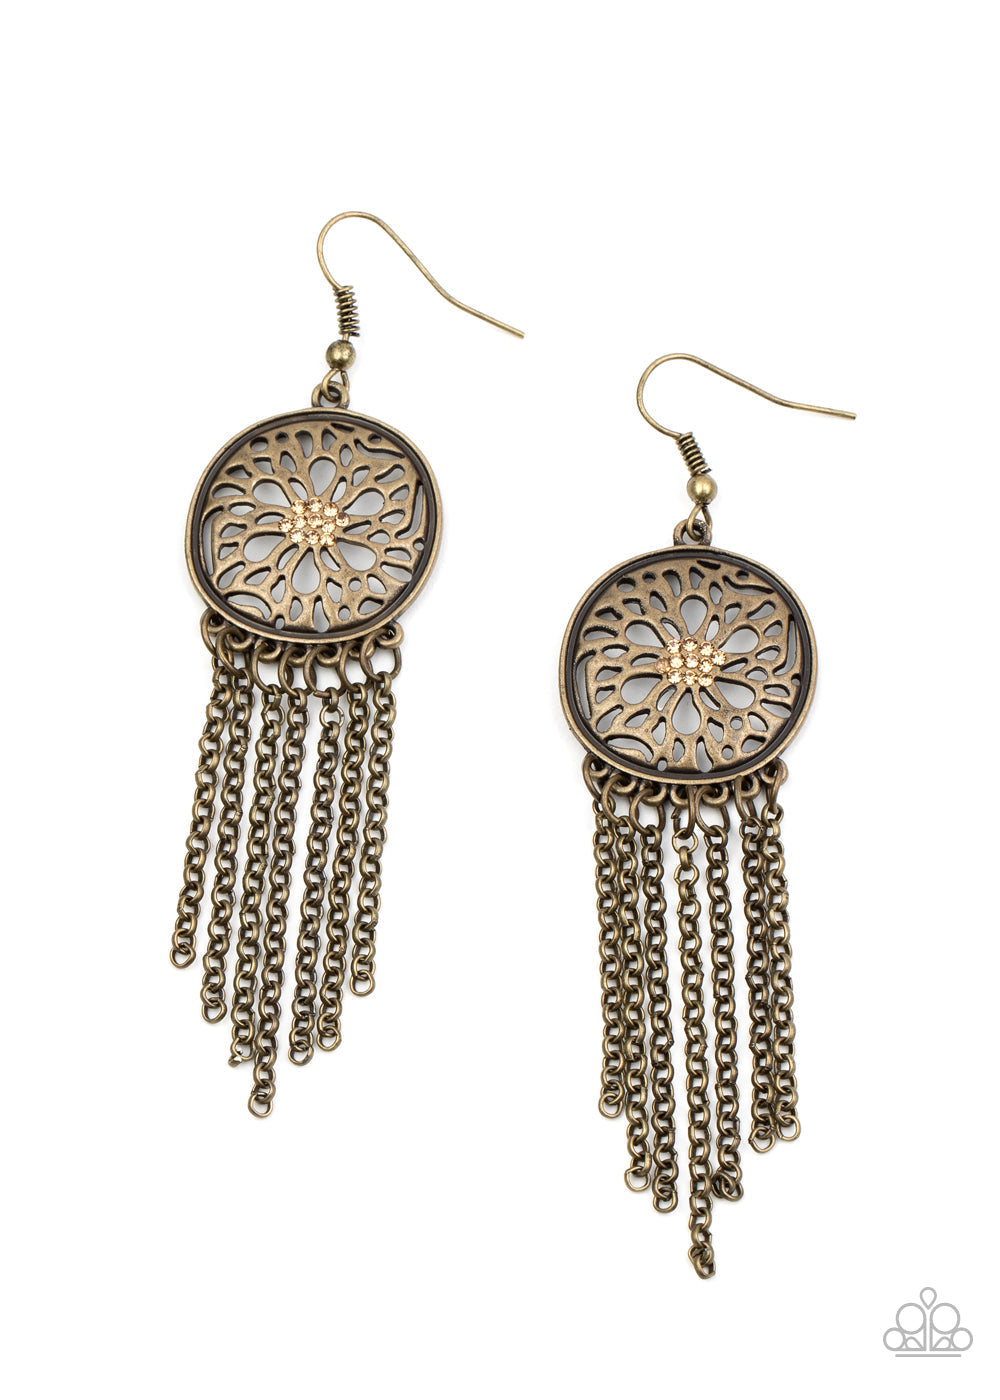 Blissfully Botanical - Brass Floral Earrings - Paparazzi Accessories - Dotted with dainty topaz rhinestones, an antiqued brass floral frame gives way to a fringe of dainty brass chains, creating a whimsically tasseled look. Earring attaches to a standard fishhook fitting. Sold as one pair of earrings.